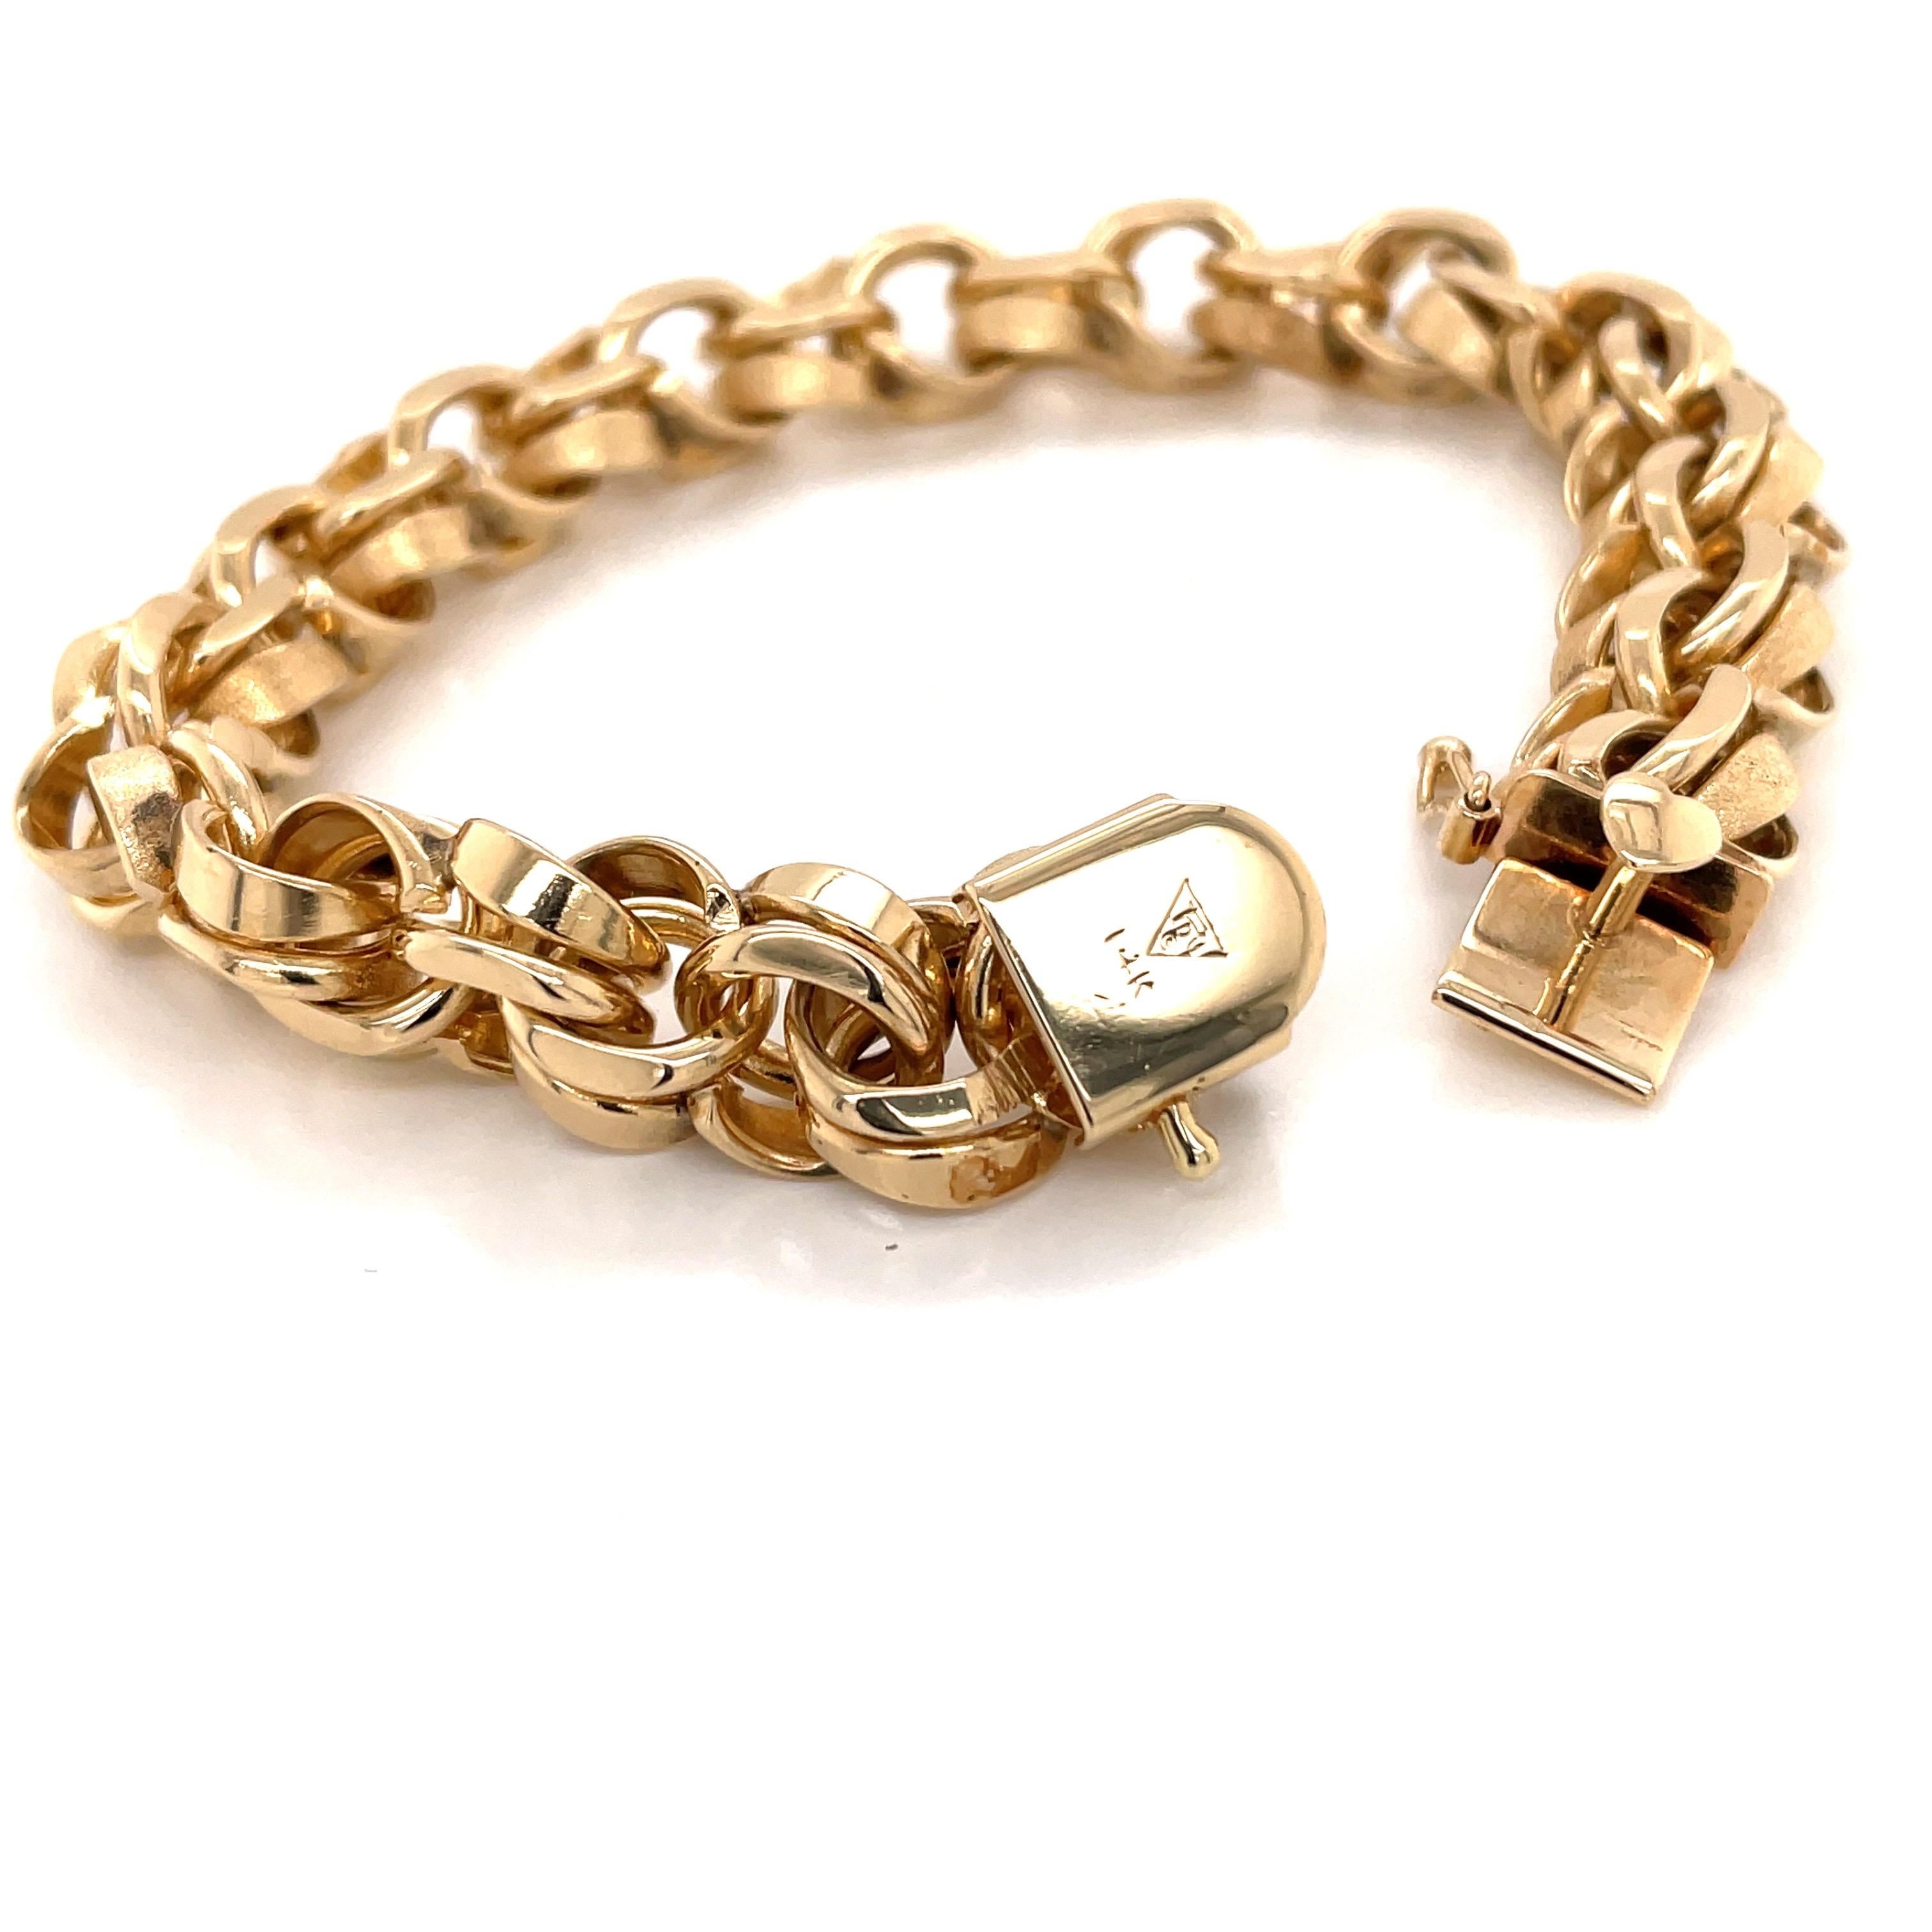 Vintage 1990s 14 Karat Yellow Gold Heavy Charm Bracelet In Good Condition For Sale In Boston, MA